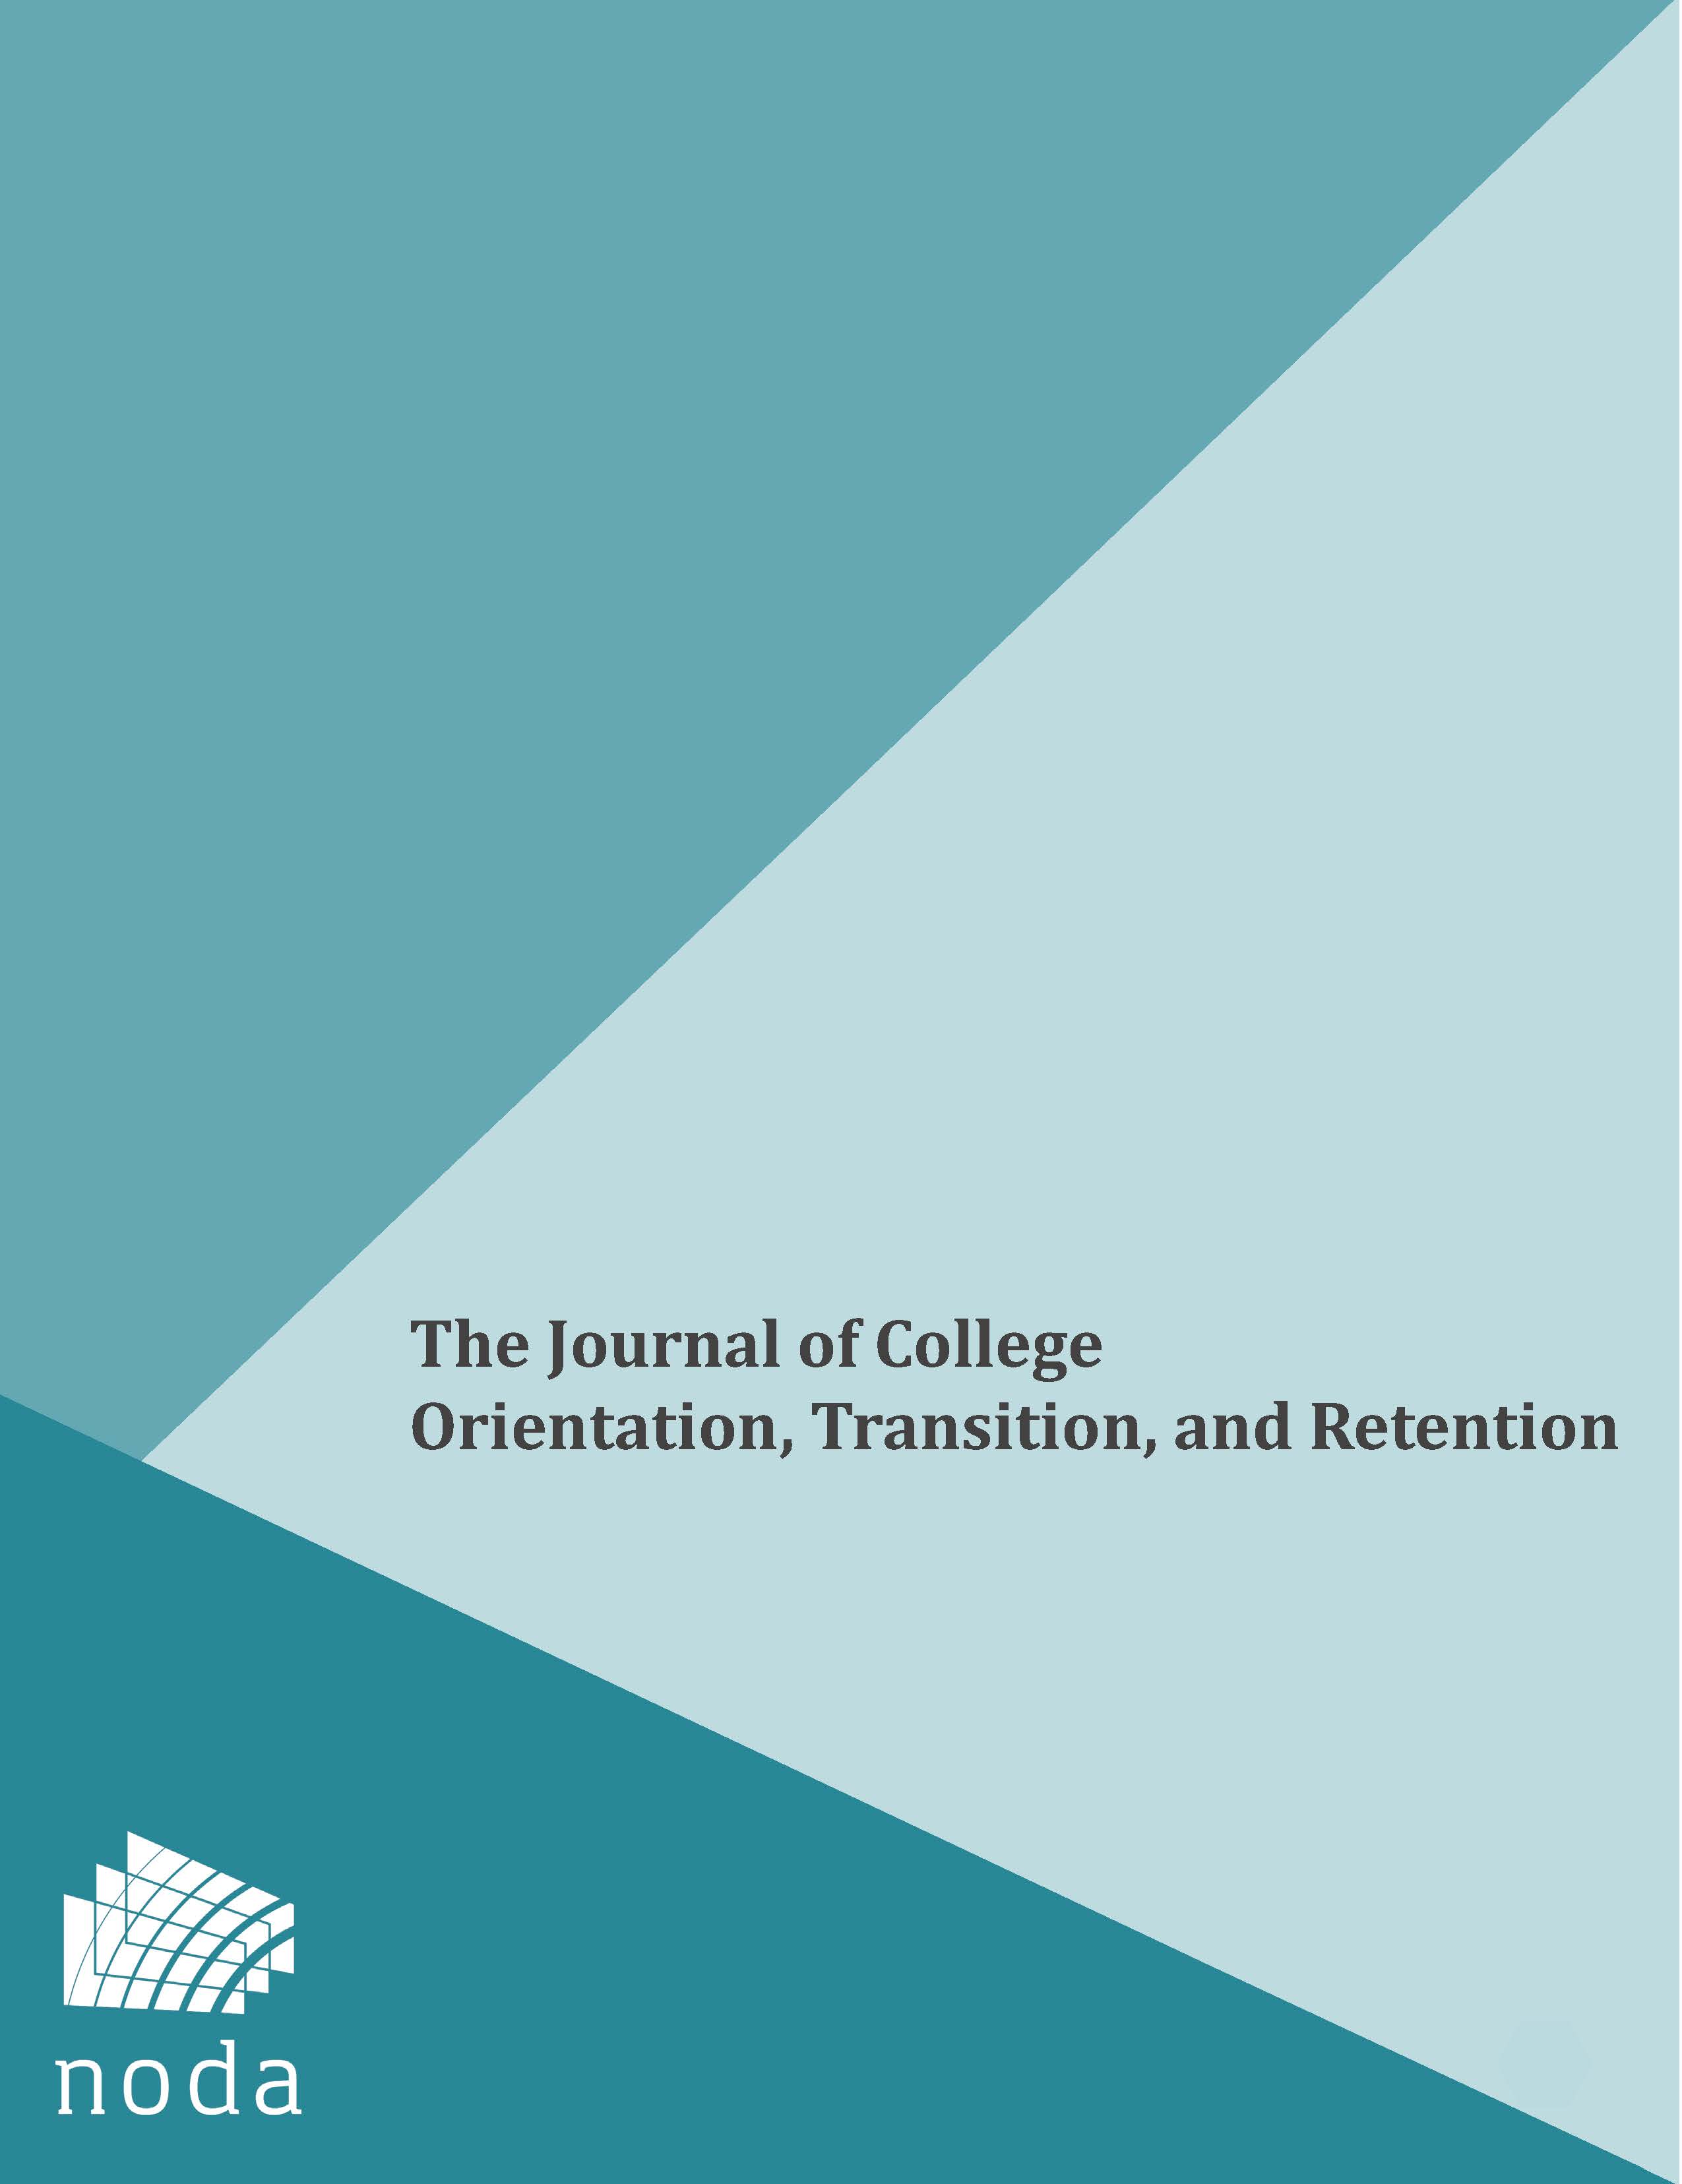 Designed cover of the Journal of College Orientation, Transition, and Retention